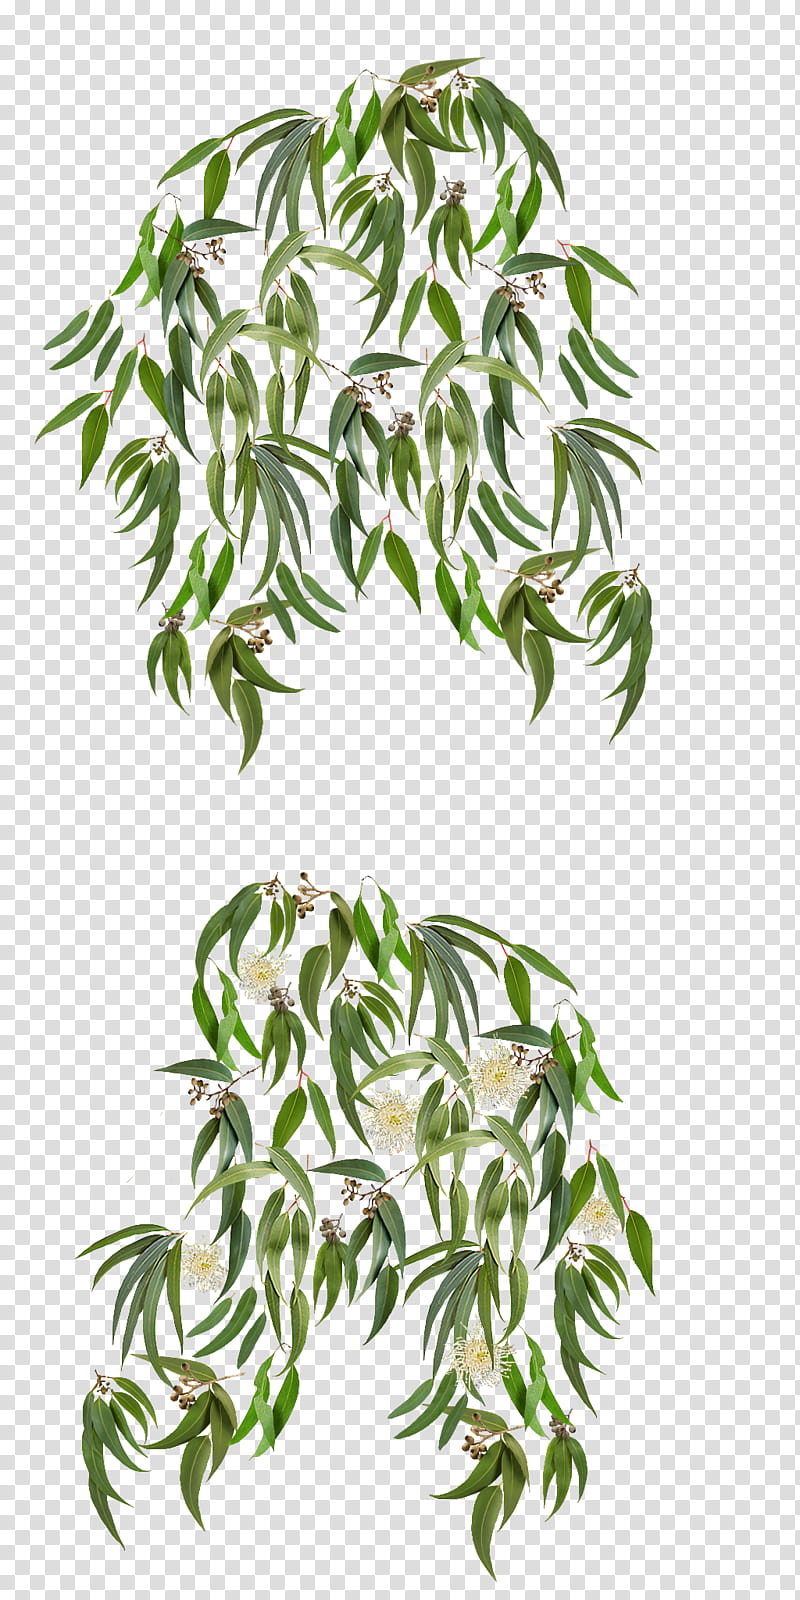 Eucalyptus leaves isolated, green leafed plant painting transparent background PNG clipart